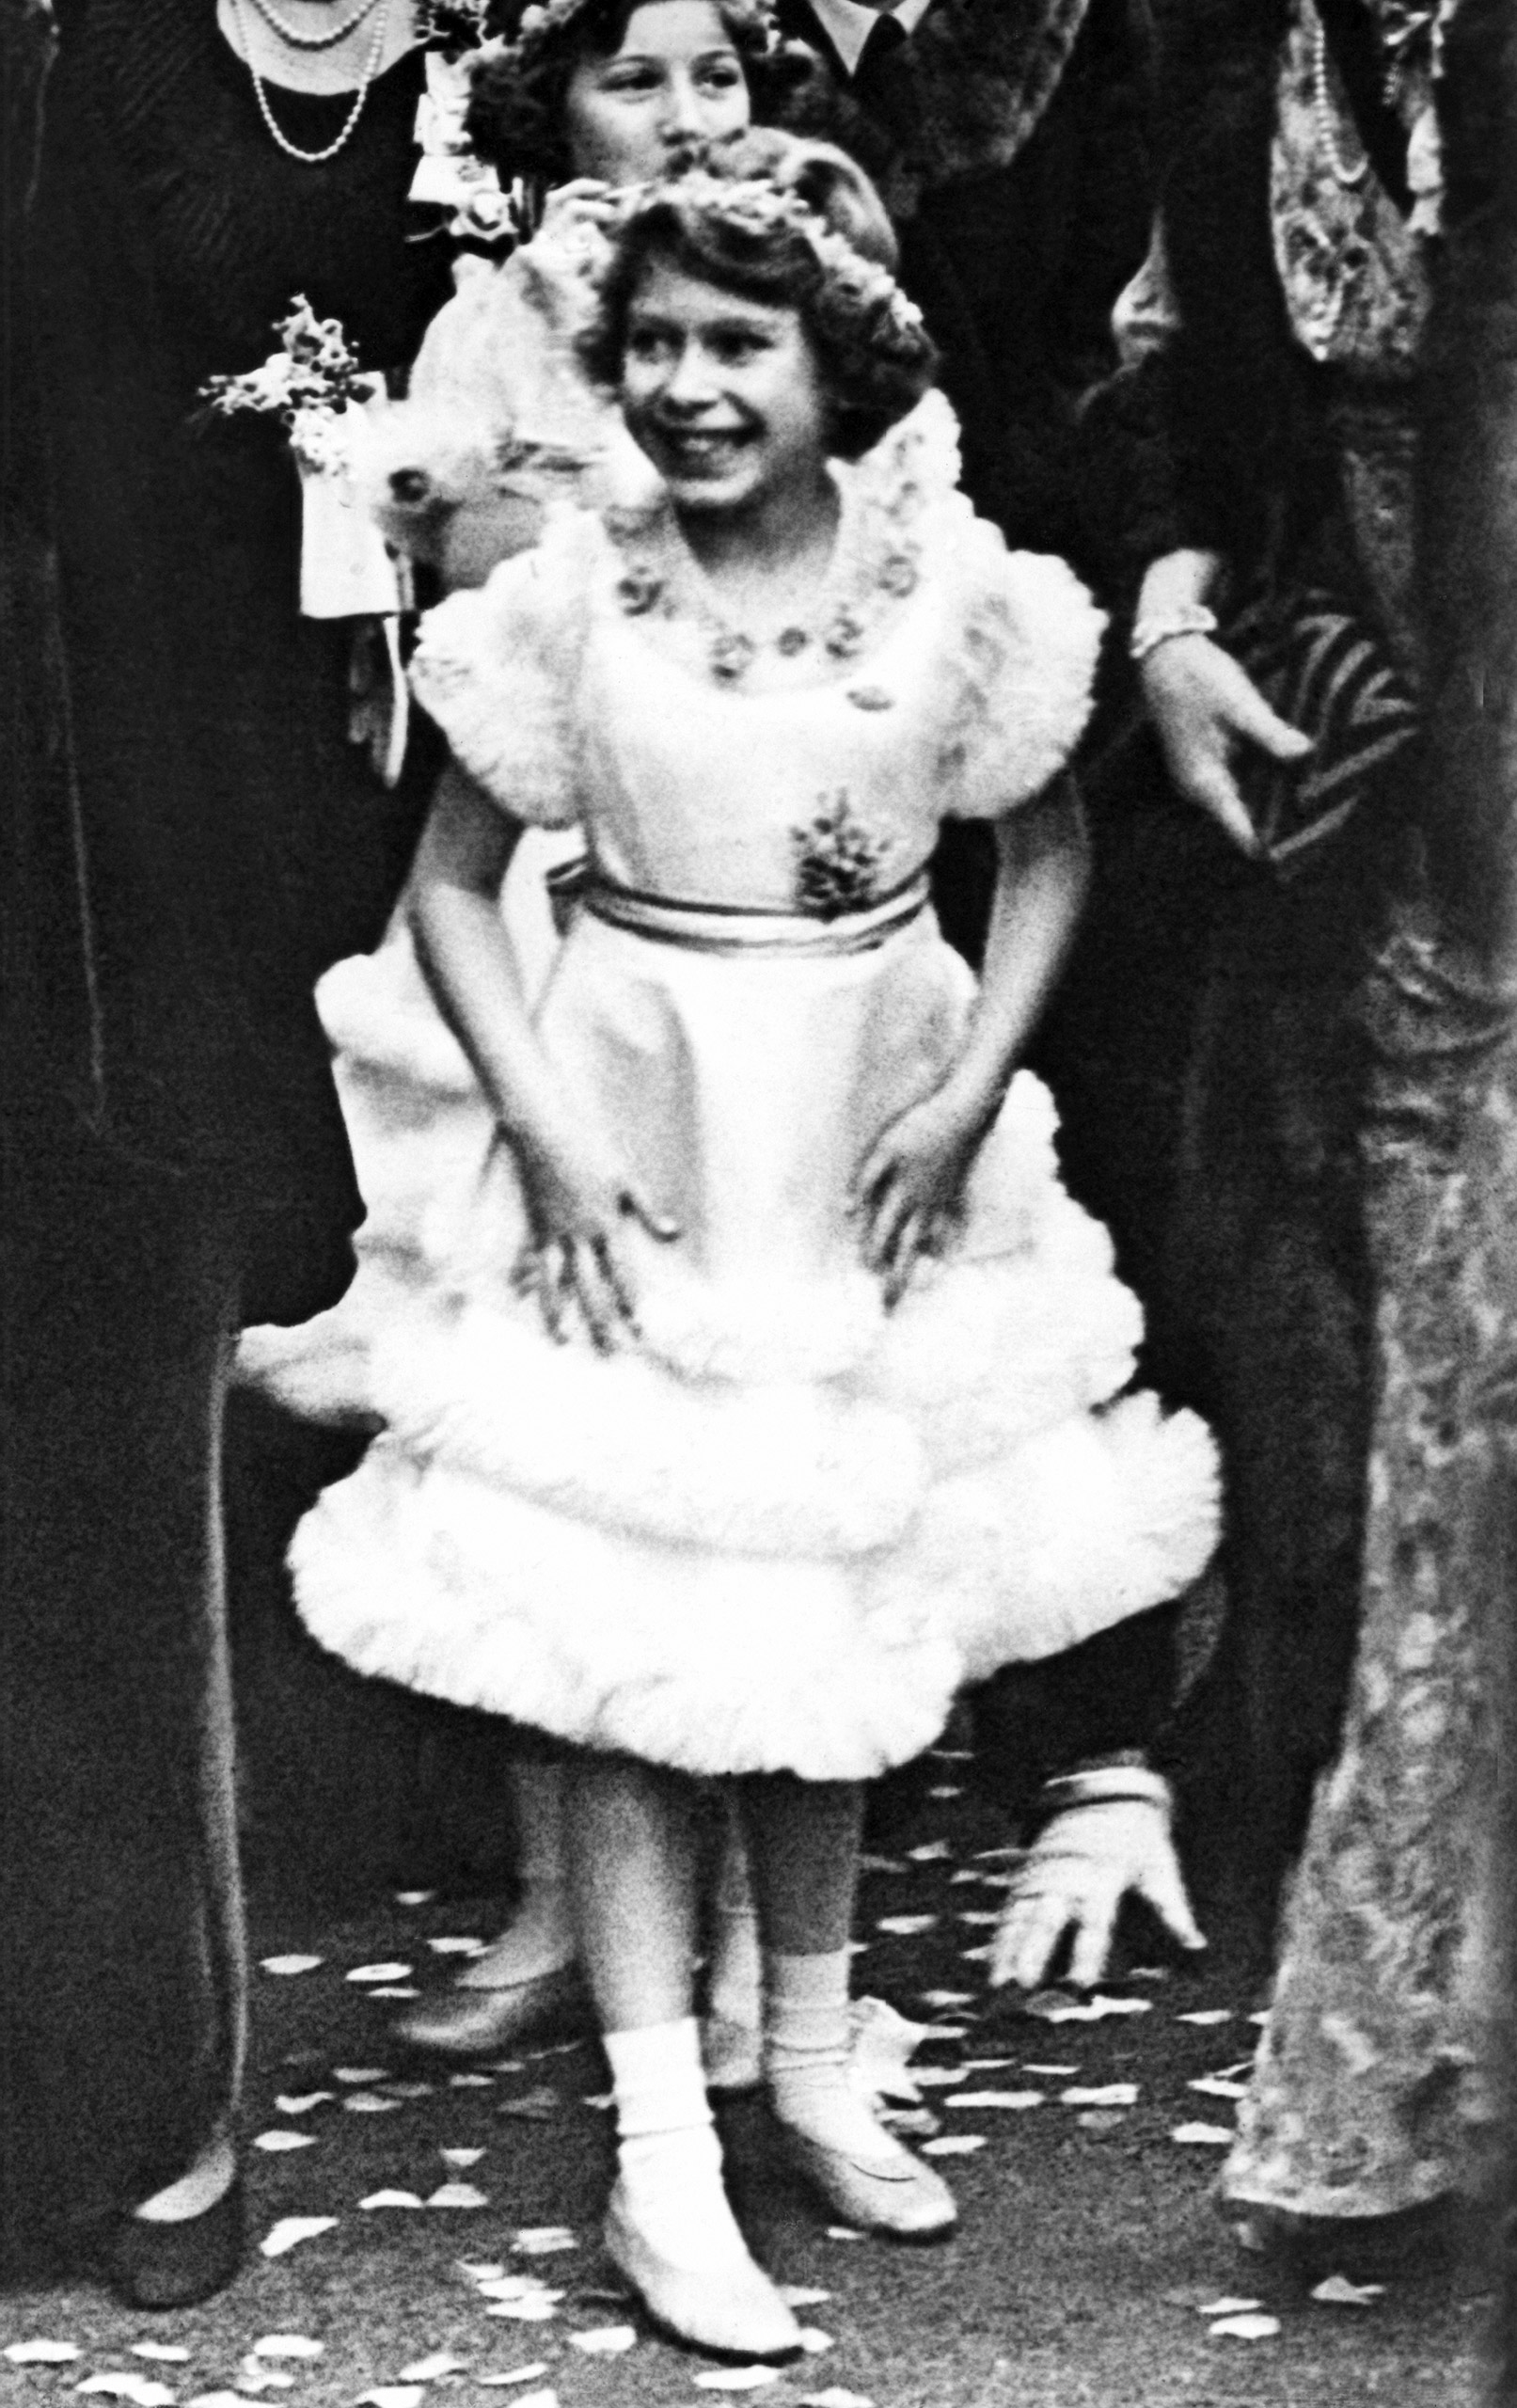 Princess Elizabeth, age 9, after the wedding of the Duke of Gloucester and Lady Alice Scott on Nov. 6, 1935.